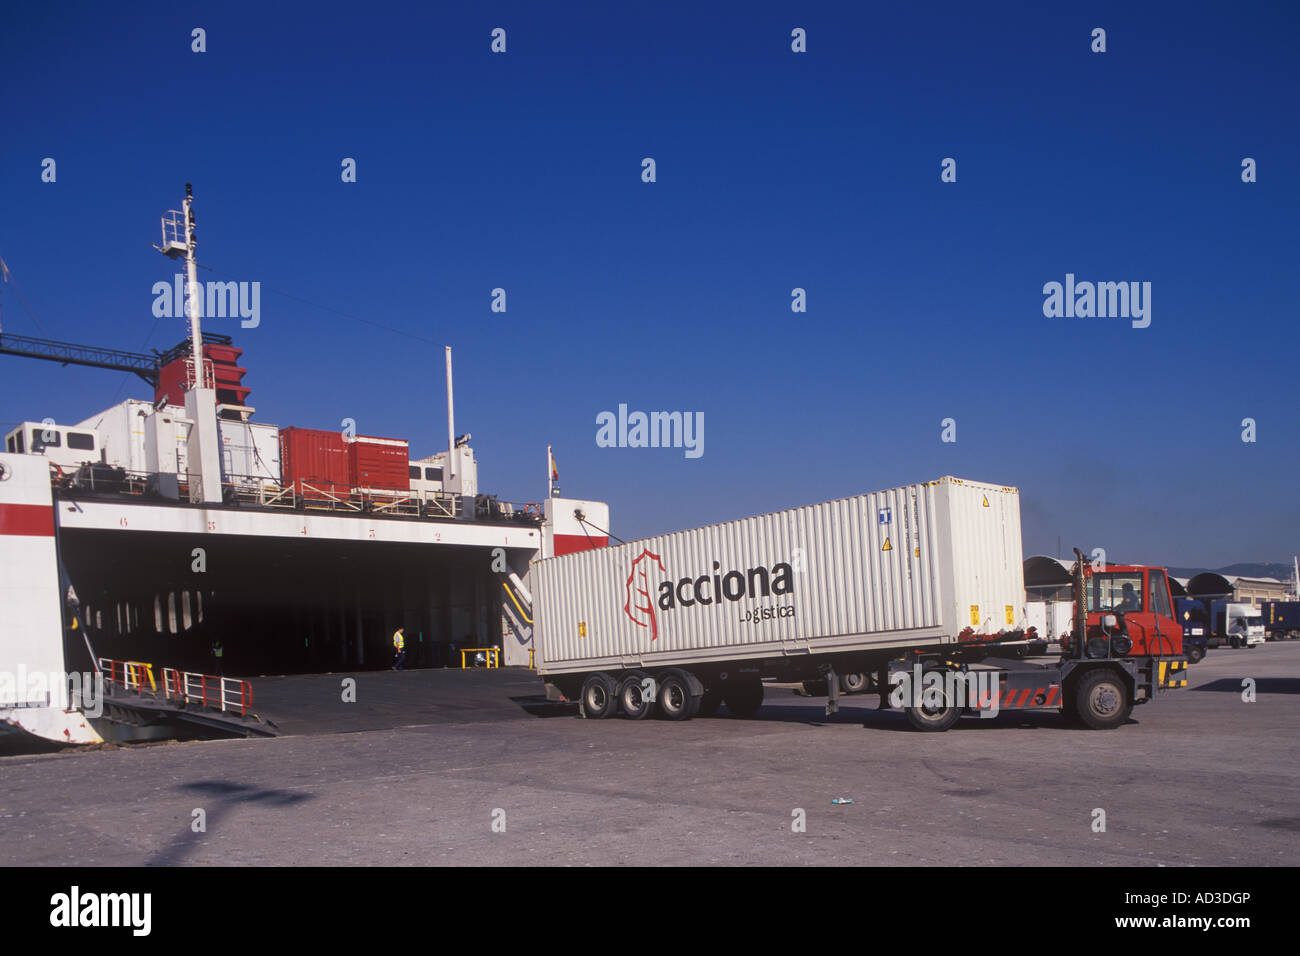 Cargo and passenger operations in the Port of Palma de Mallorca, Balearic Islands, Spain. Stock Photo